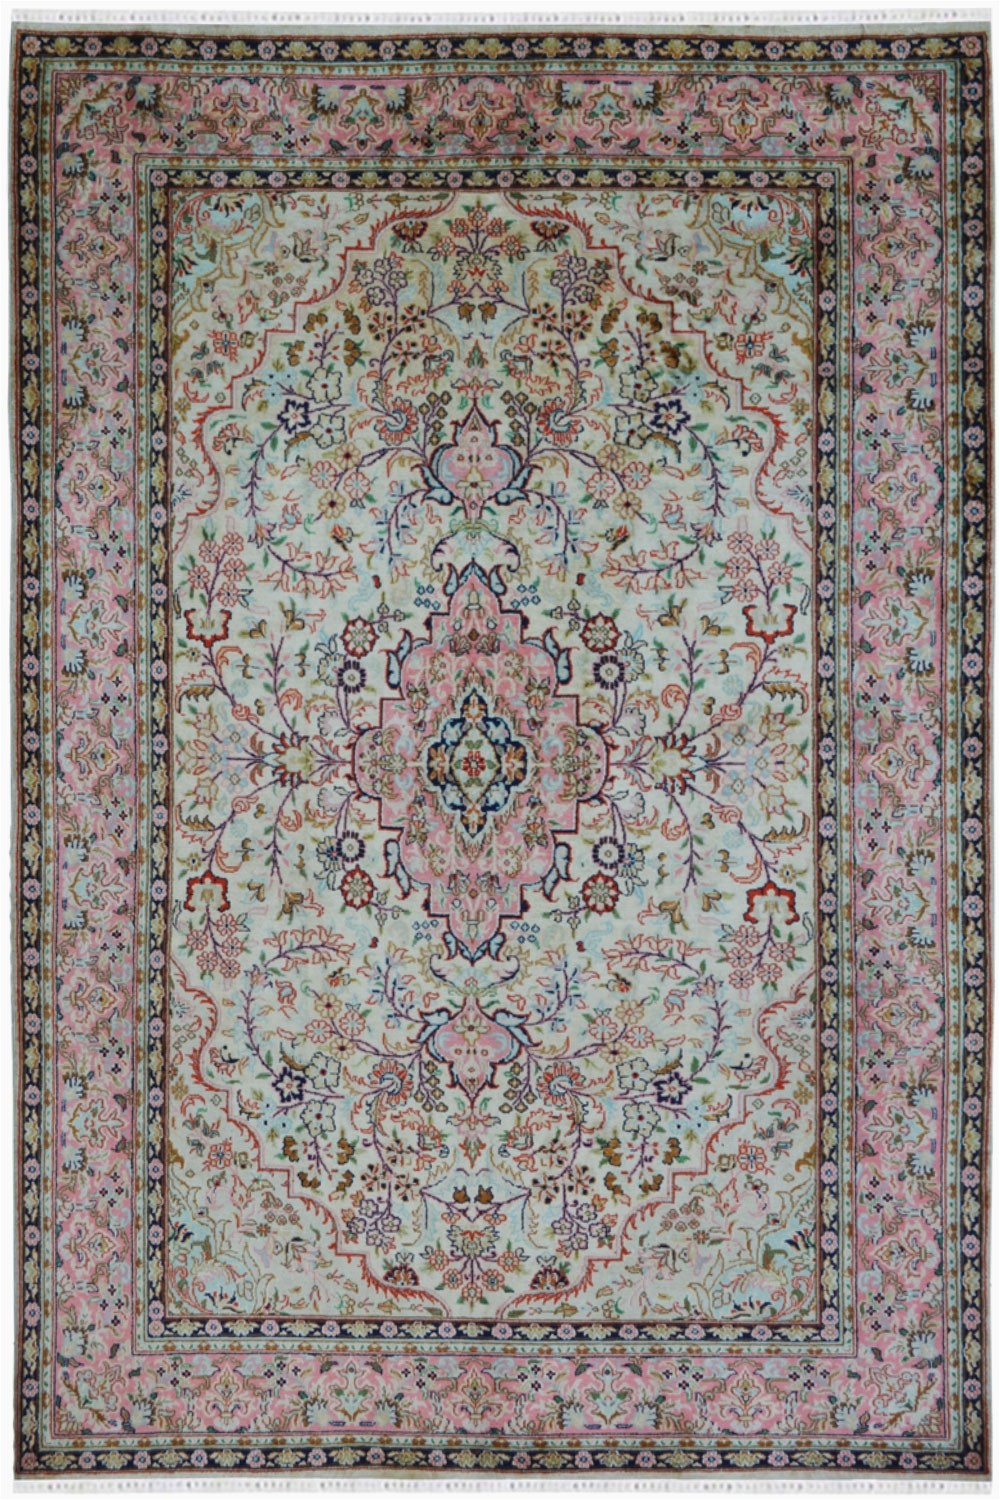 Green and Pink area Rugs Pista Salmon Silk Cotton area Rug